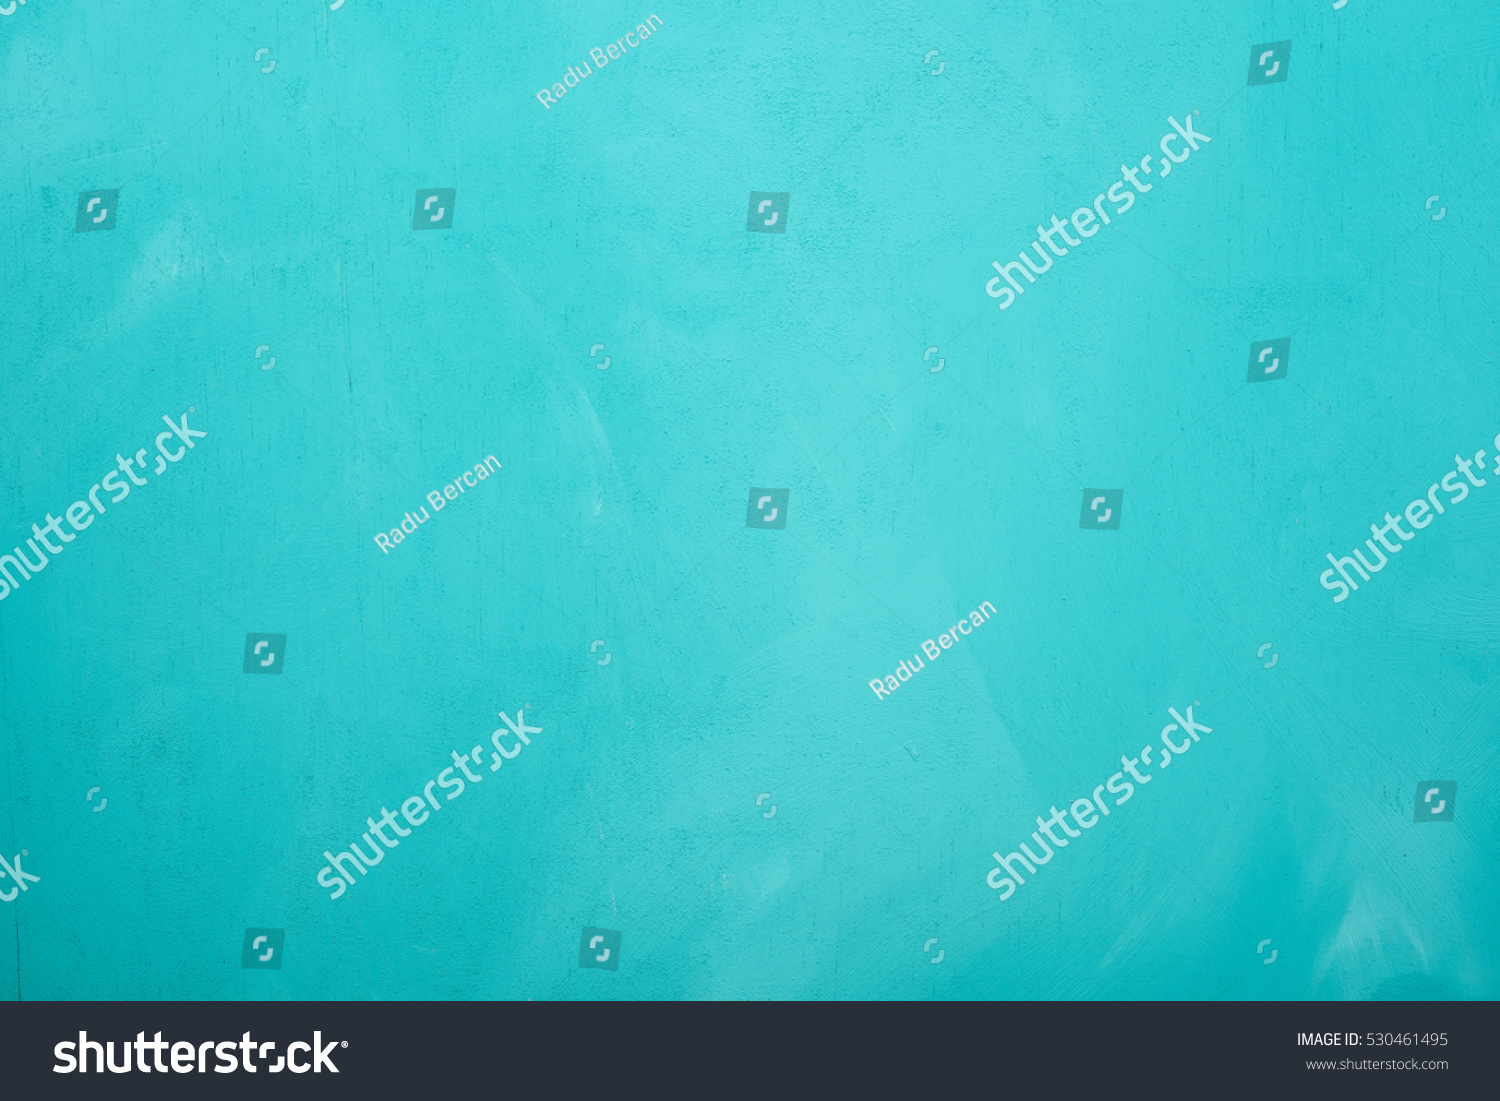 Blue Turquoise Wooden Board Background Texture #530461495